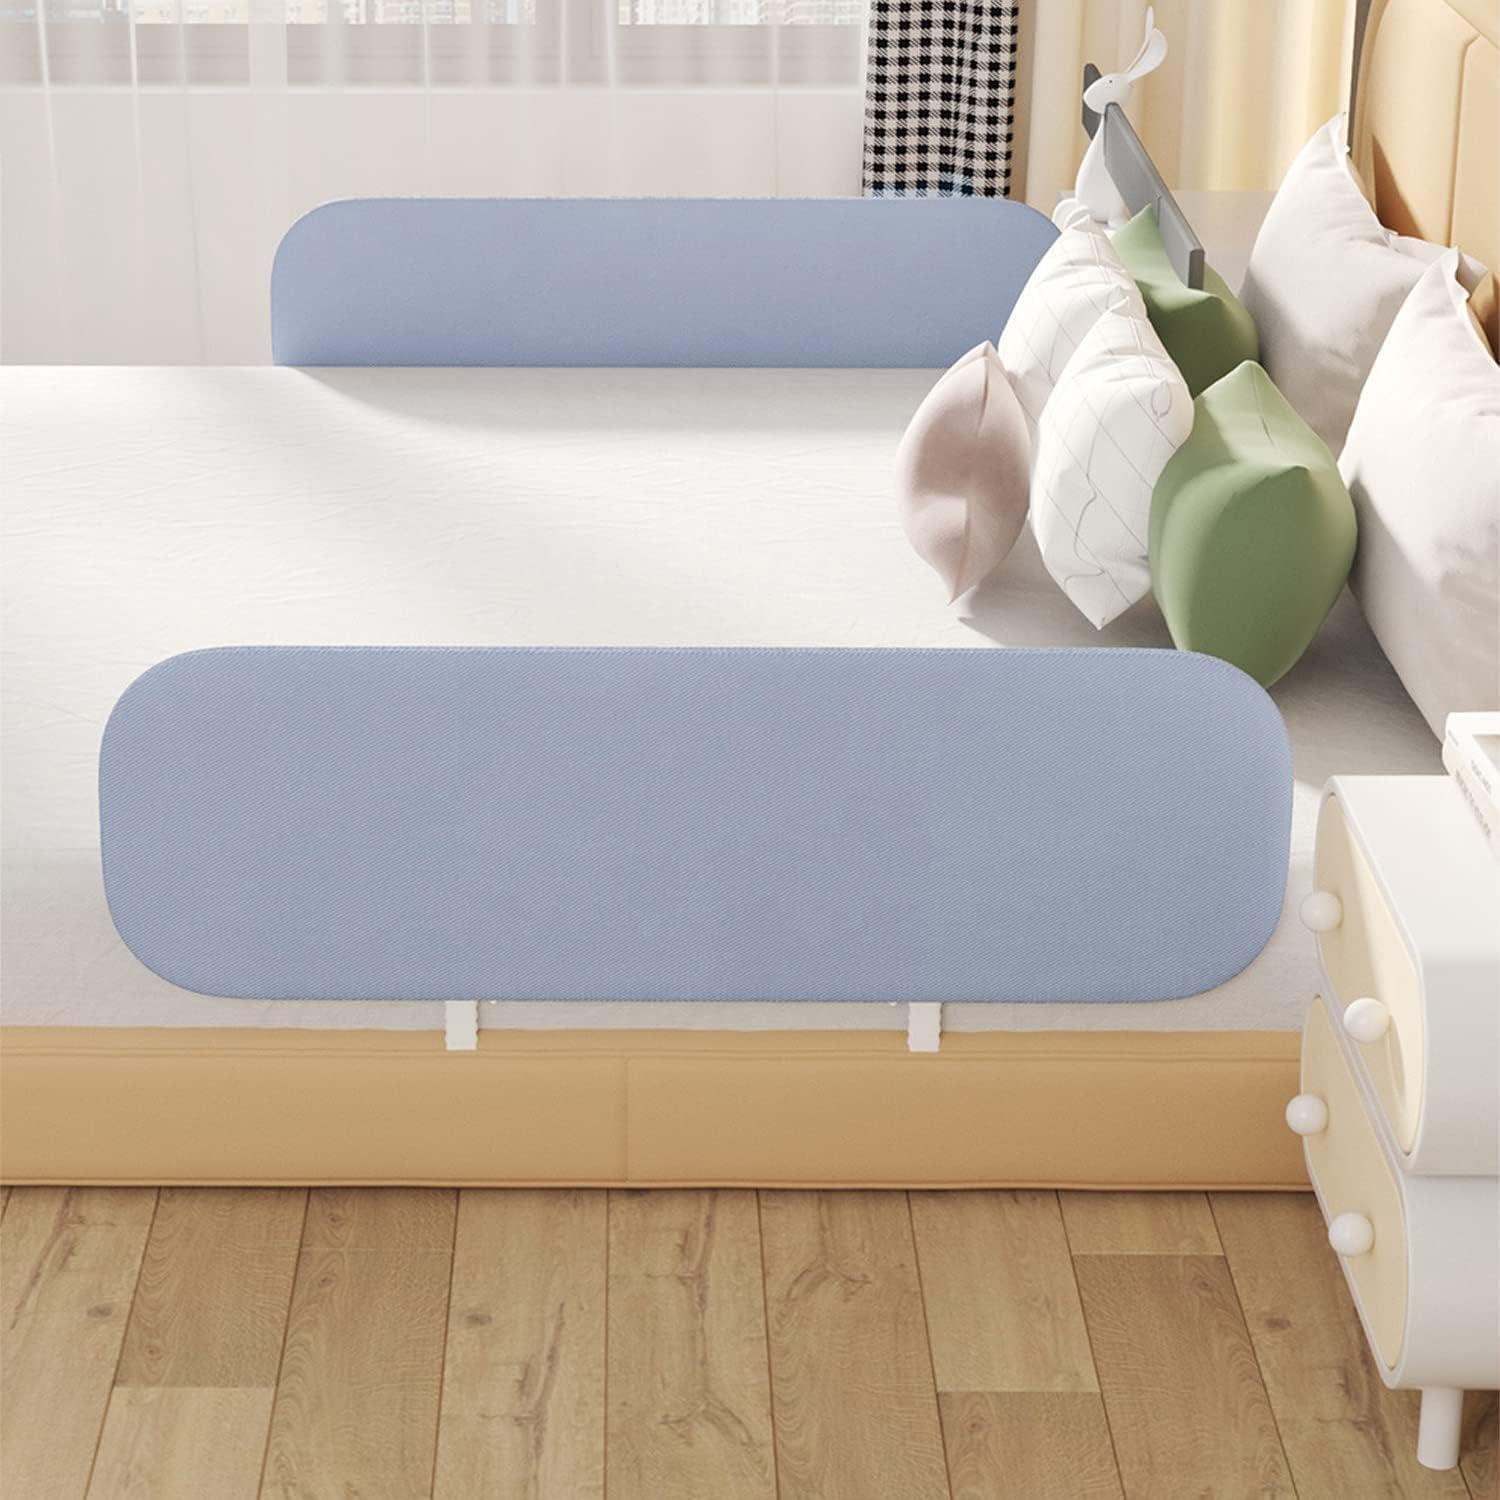 Stop Toddler Bed Rails for Crib,Toddler Bed Rails Guard,Universal Baby & Children Bed Rail,Upgrade Reinforced Safety Bed Fence Protector Rail for Cribs, Twin, Double, Full Size Queen & King Bed (1.2M)